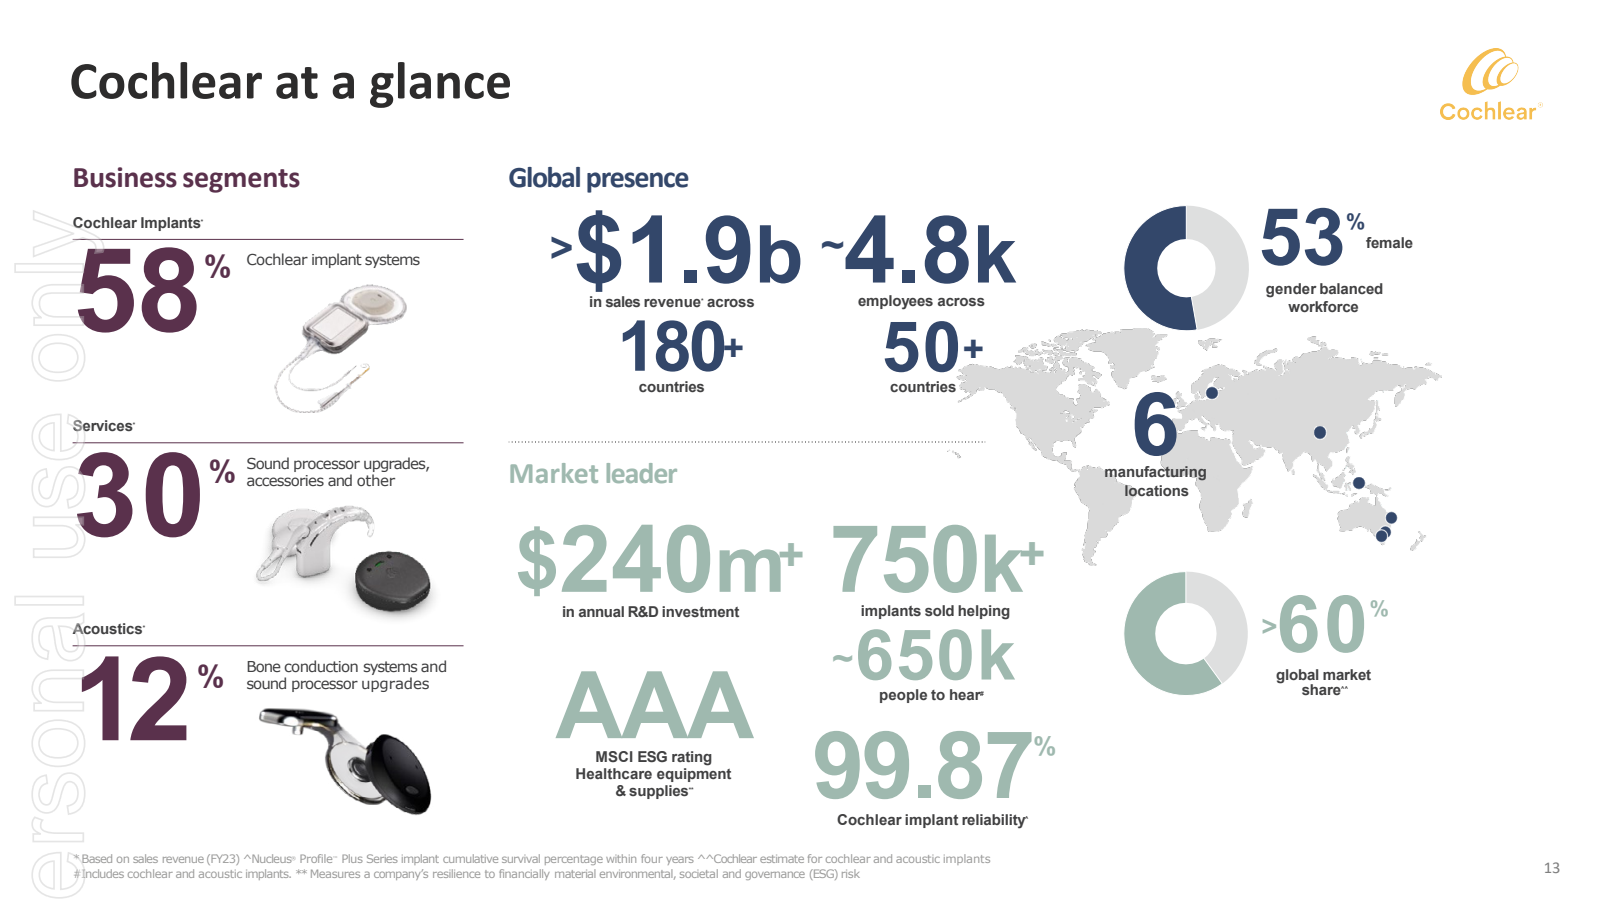 Cochlear at a glance